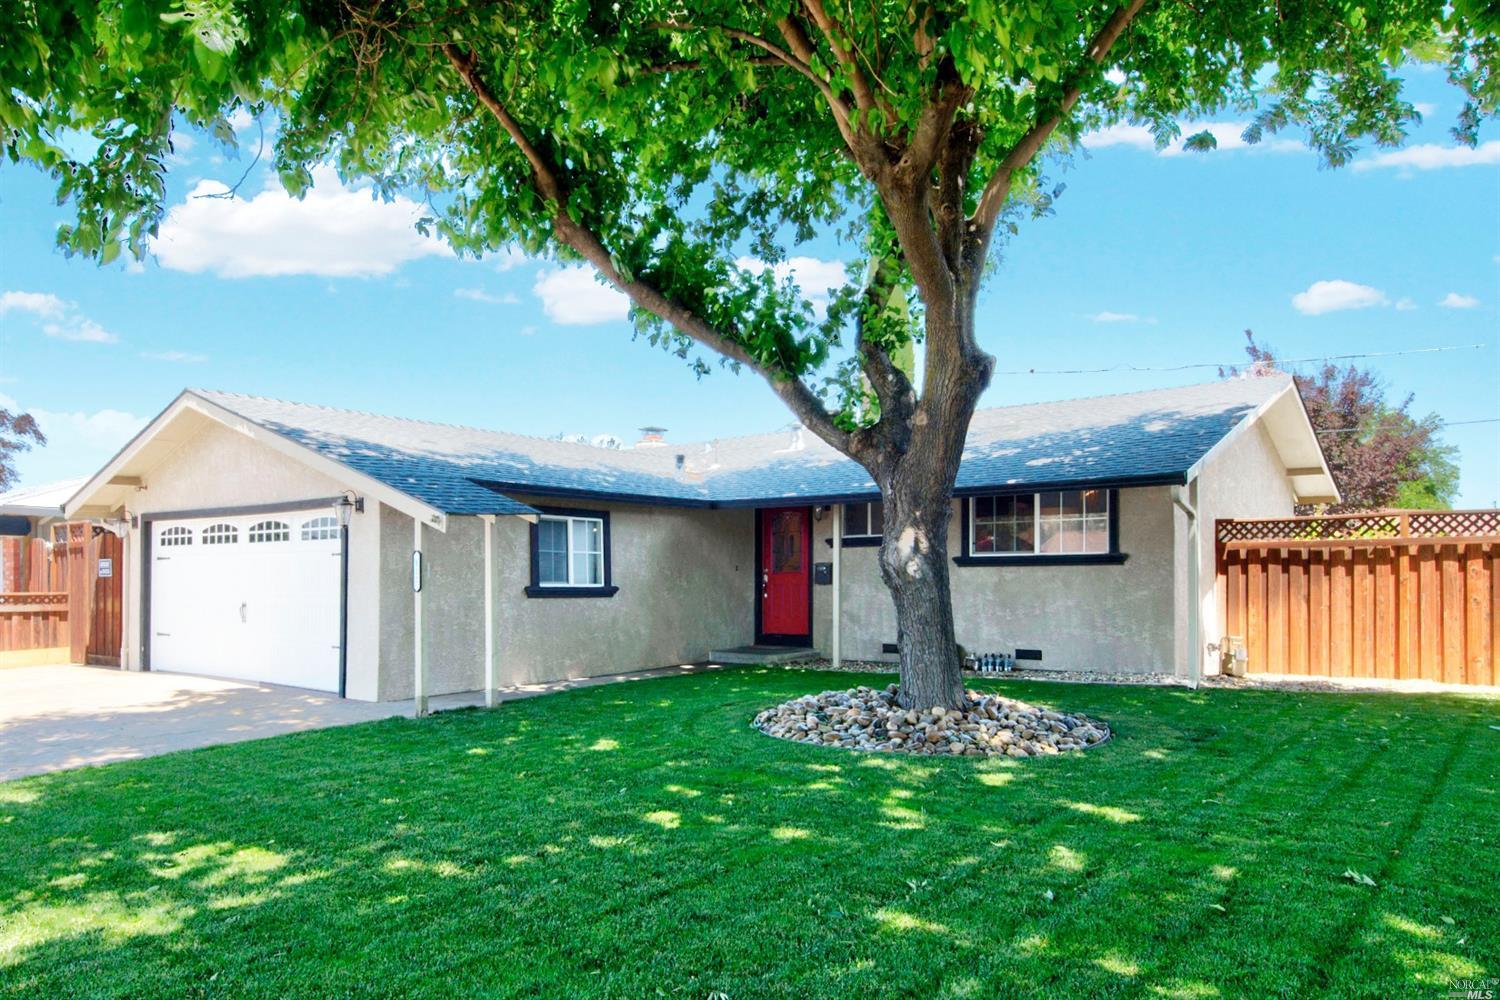 112 Tahoe Dr., Vacaville*